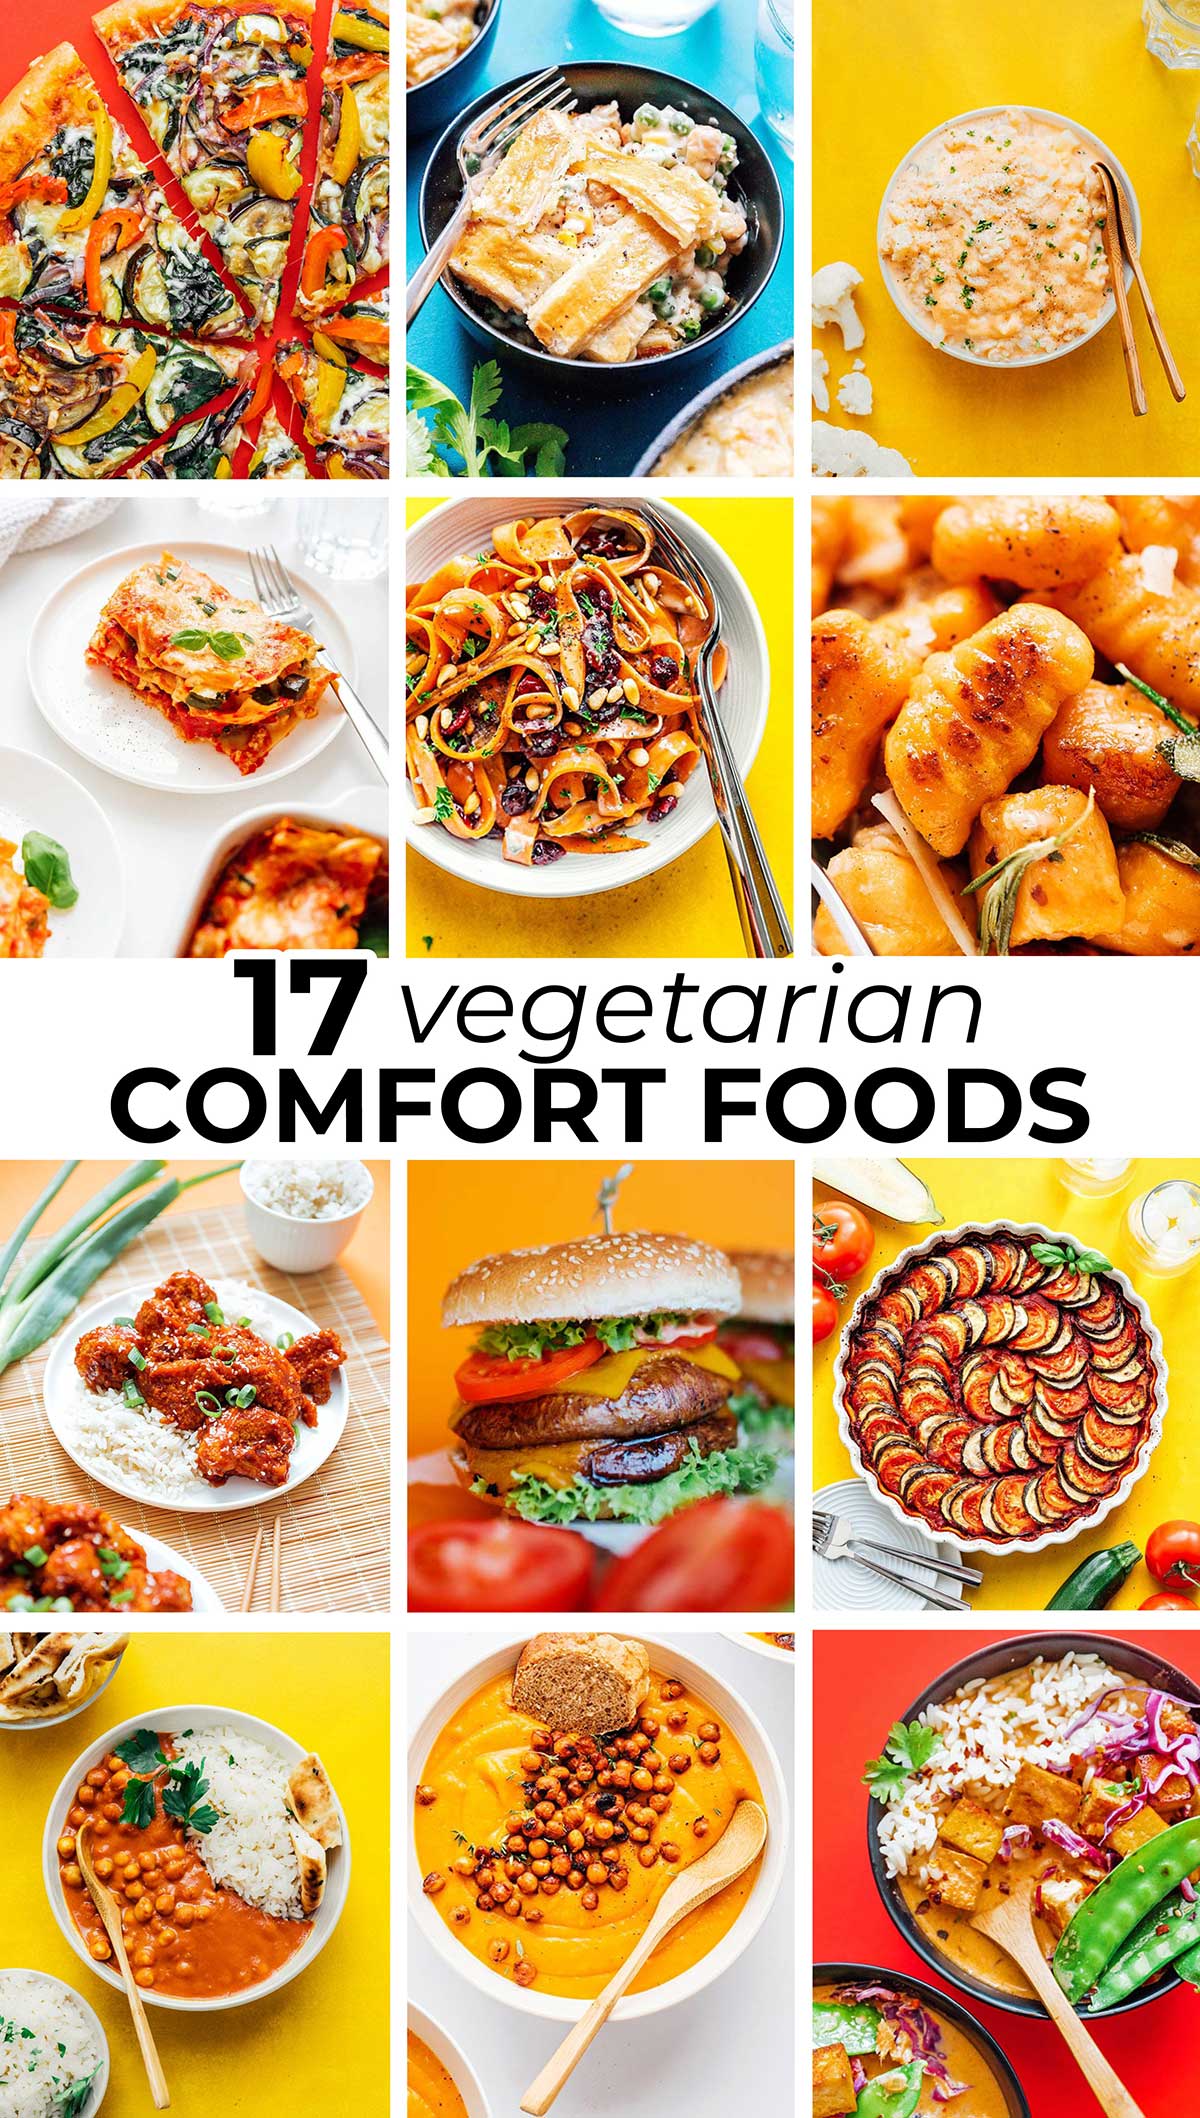 17 Mouth-Watering Vegetarian Comfort Food Recipes | Live Eat Learn